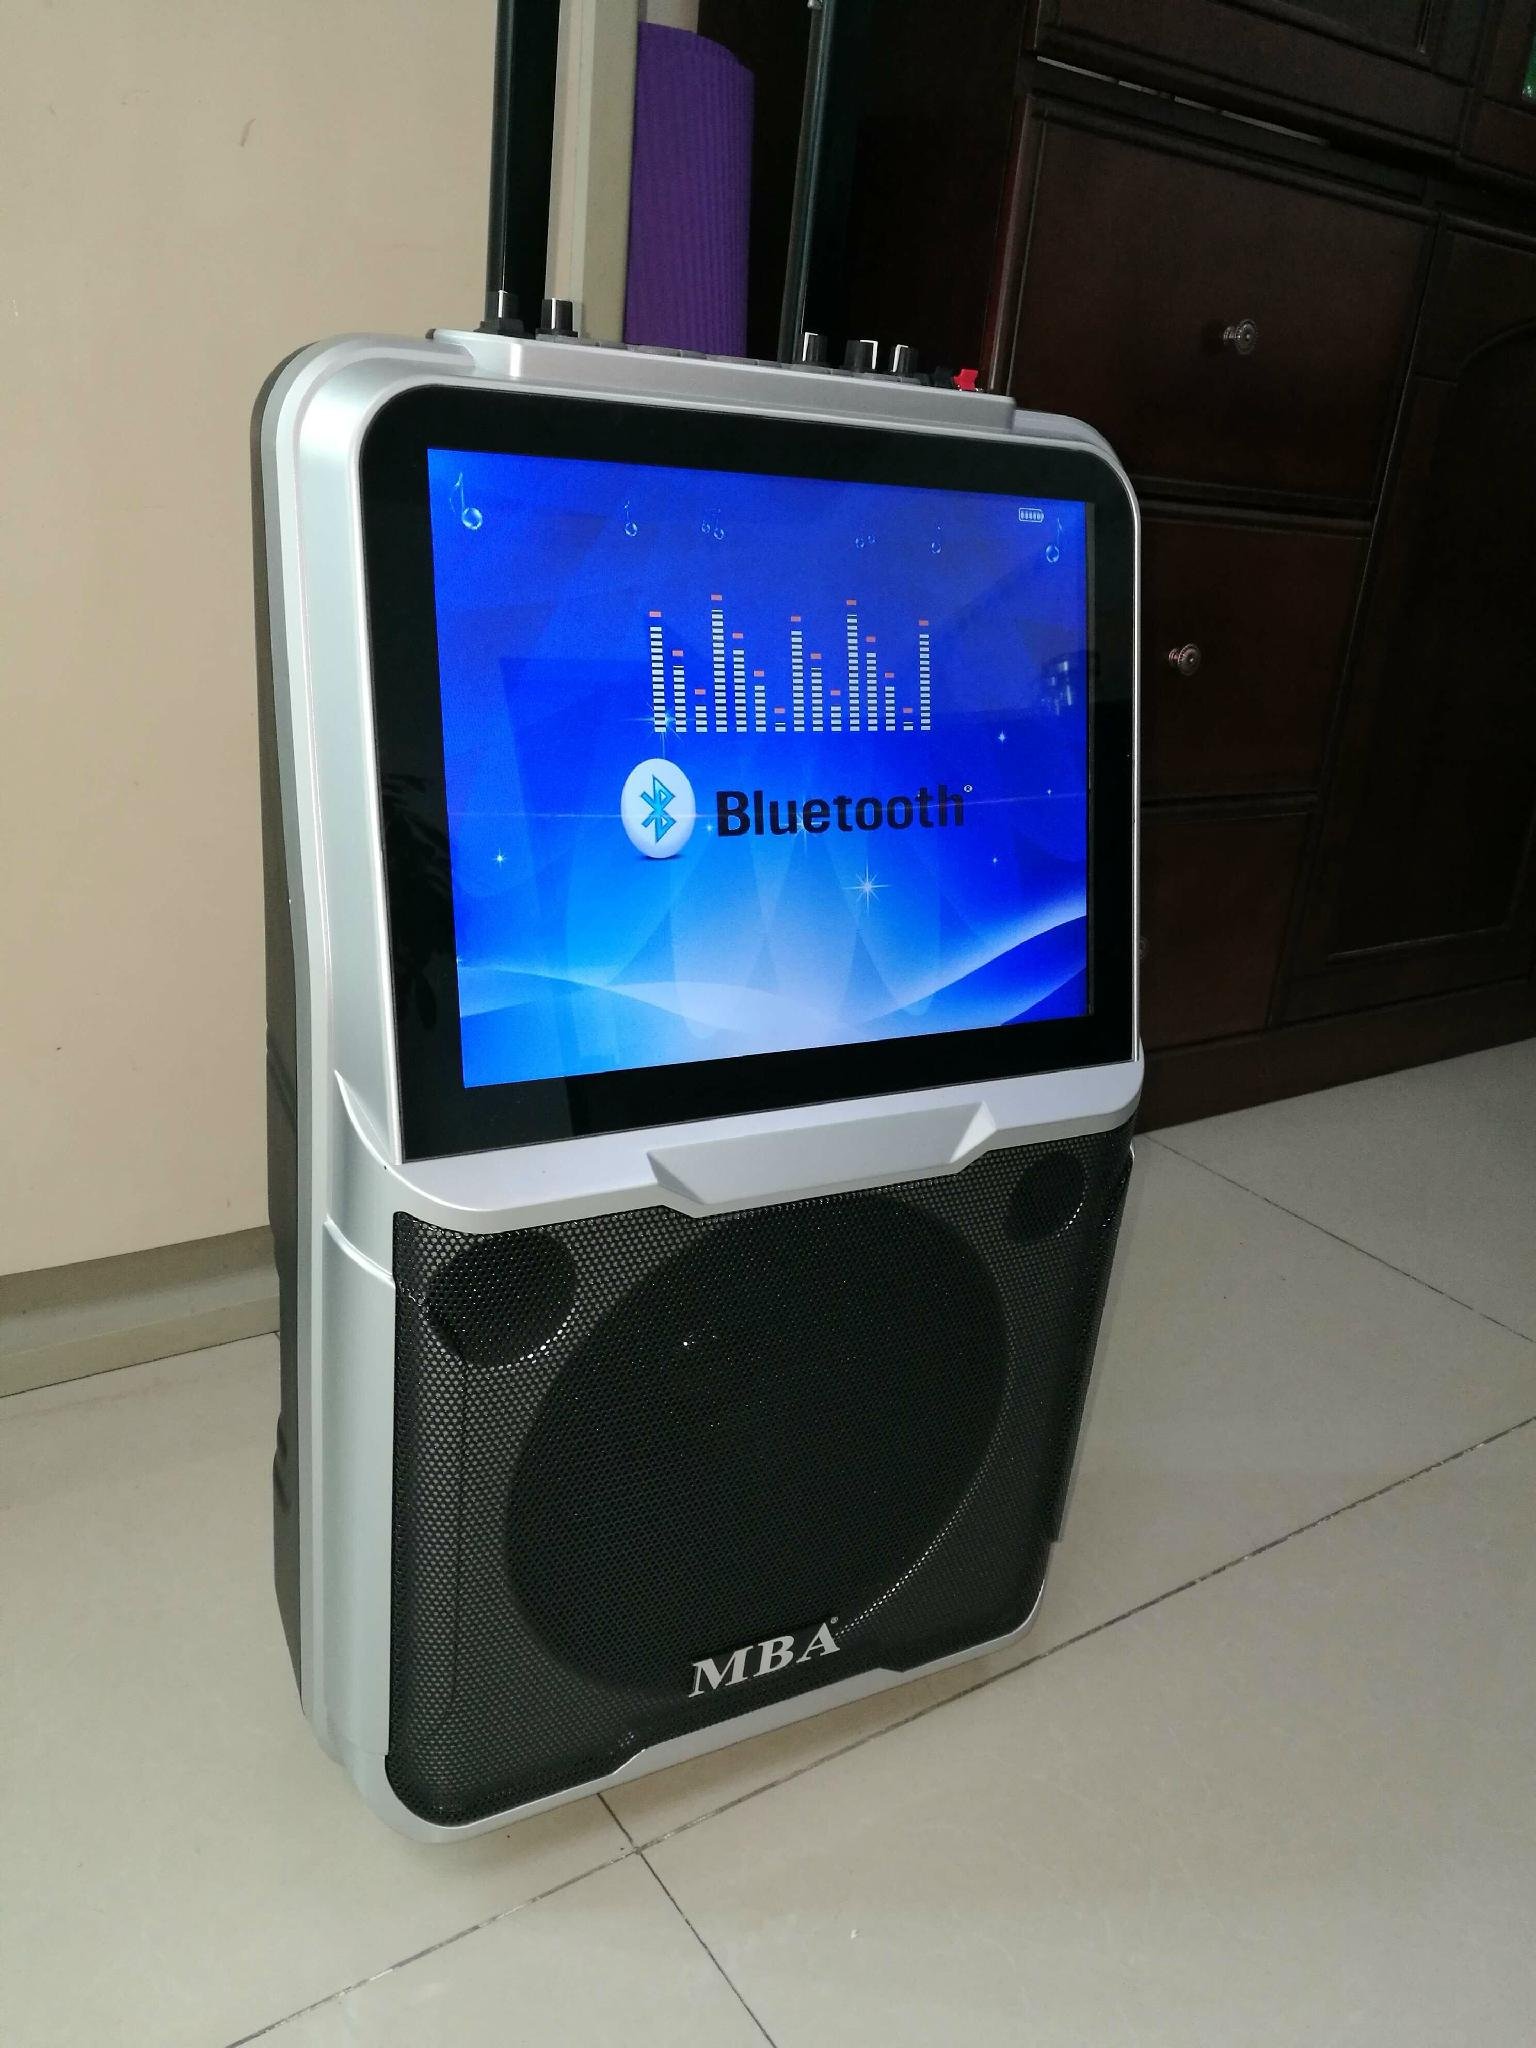 MBA trolley Recharged Amplifier Blutooth Speaker With 12 inch LED Screen display